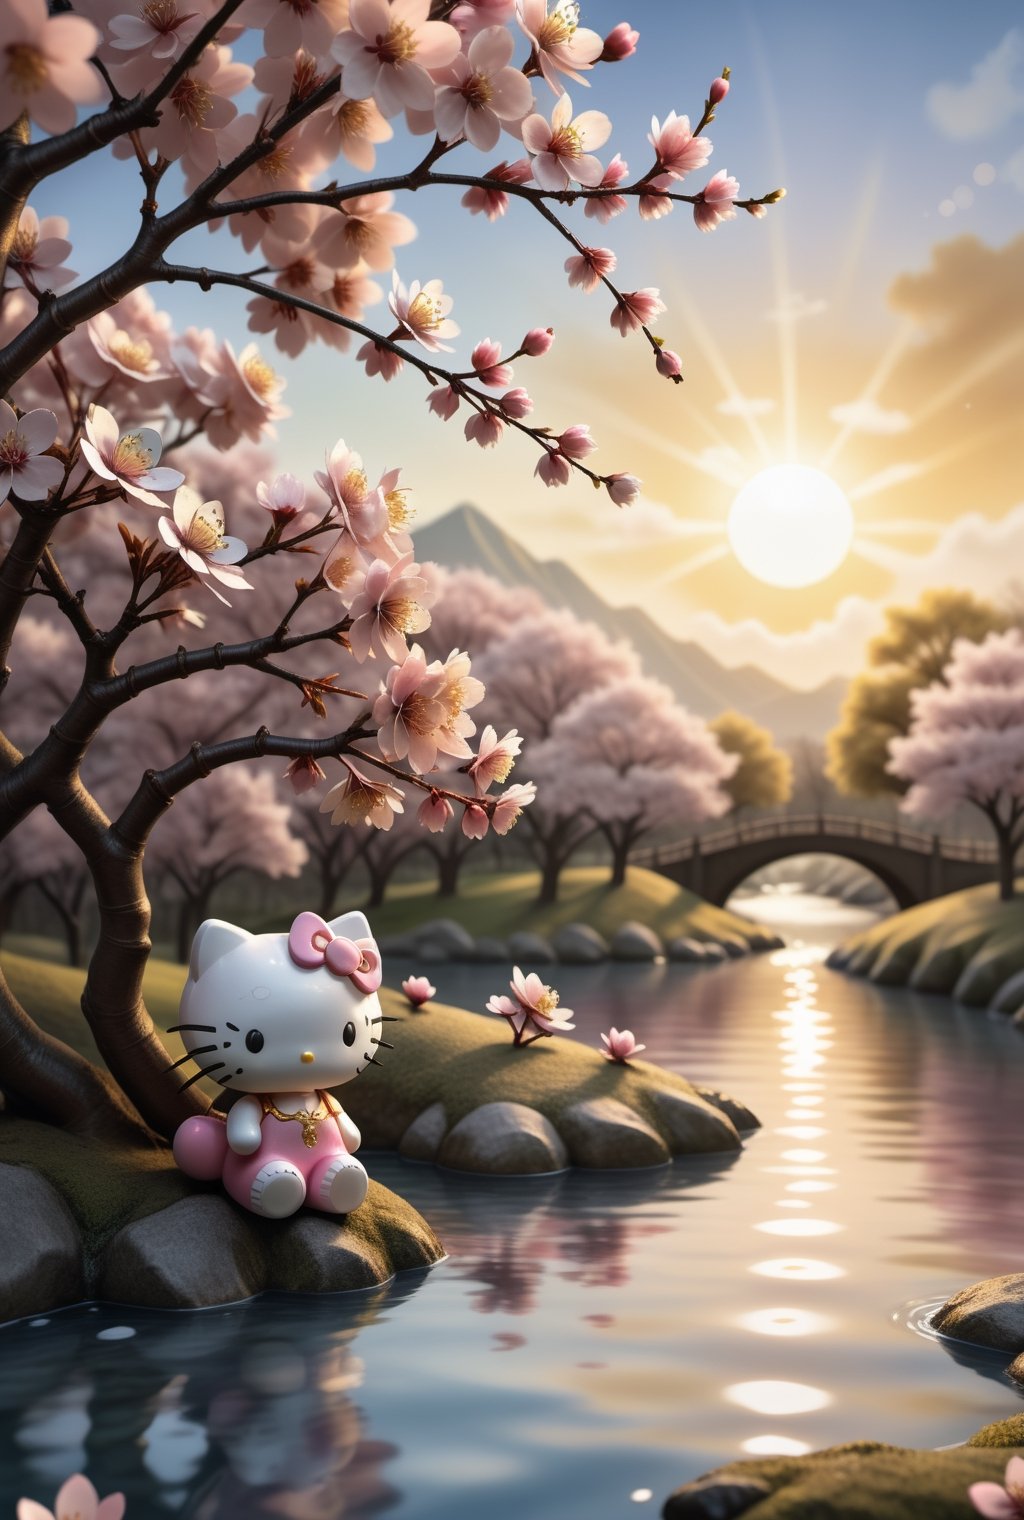 Beautiful Hello Kitty in the golden hour, depicted in 3D illustration, paper weaving through a cherry blossom creek and tree. Soft colors, cumulus clouds, a large sun setting over the cherry blossom creek, fine gold lines serving as a border with an alcohol ink effect, sprinkled with glitter, and soft colors.